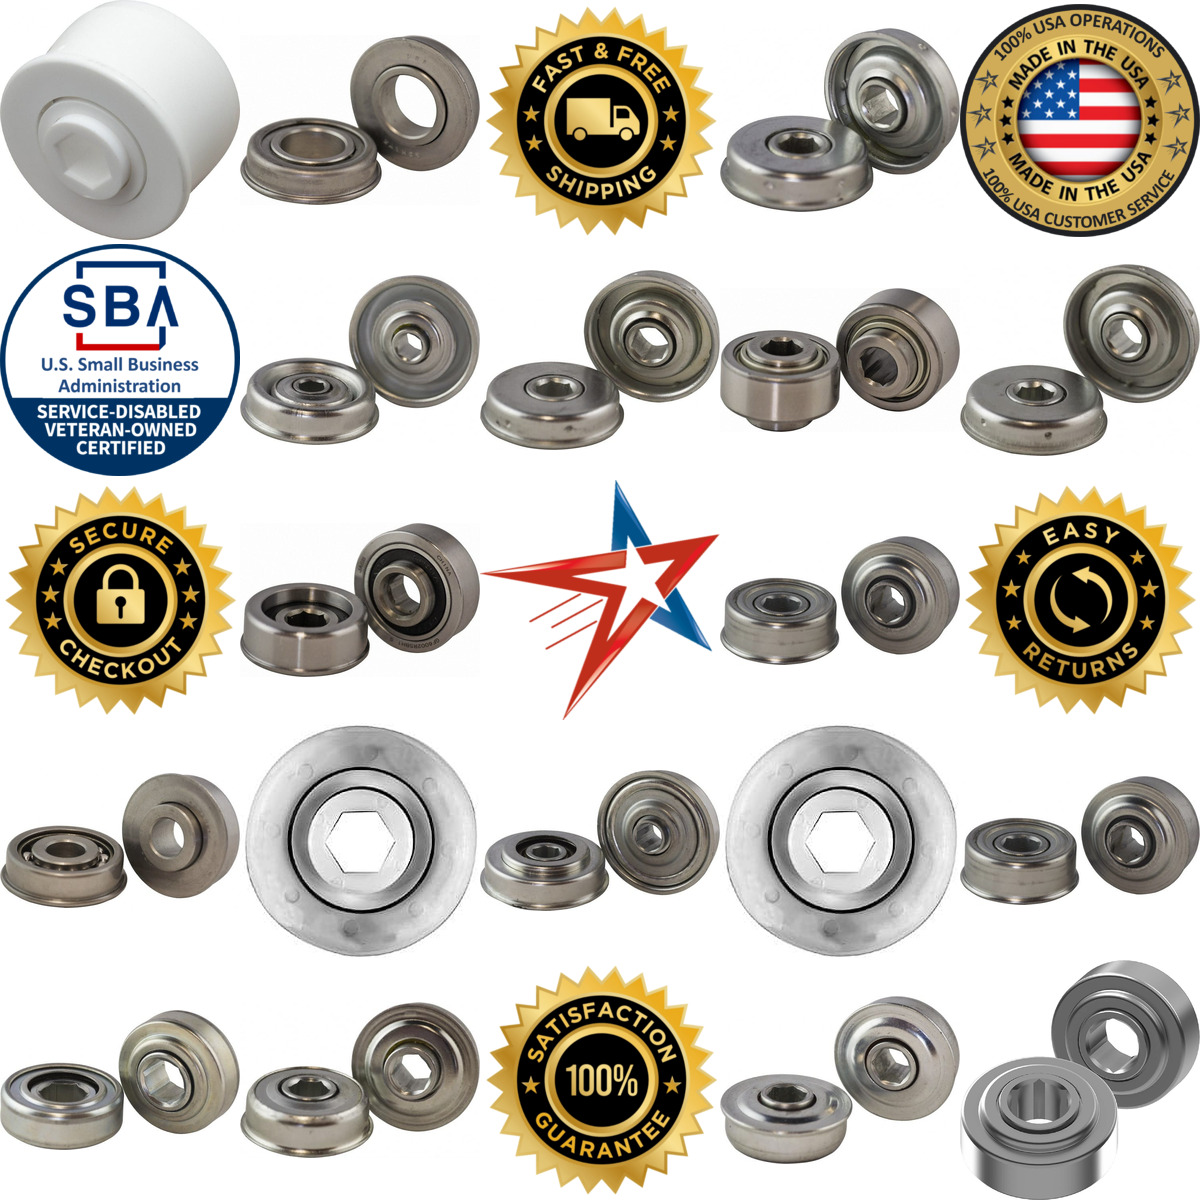 A selection of Conveyor Bearings products on GoVets